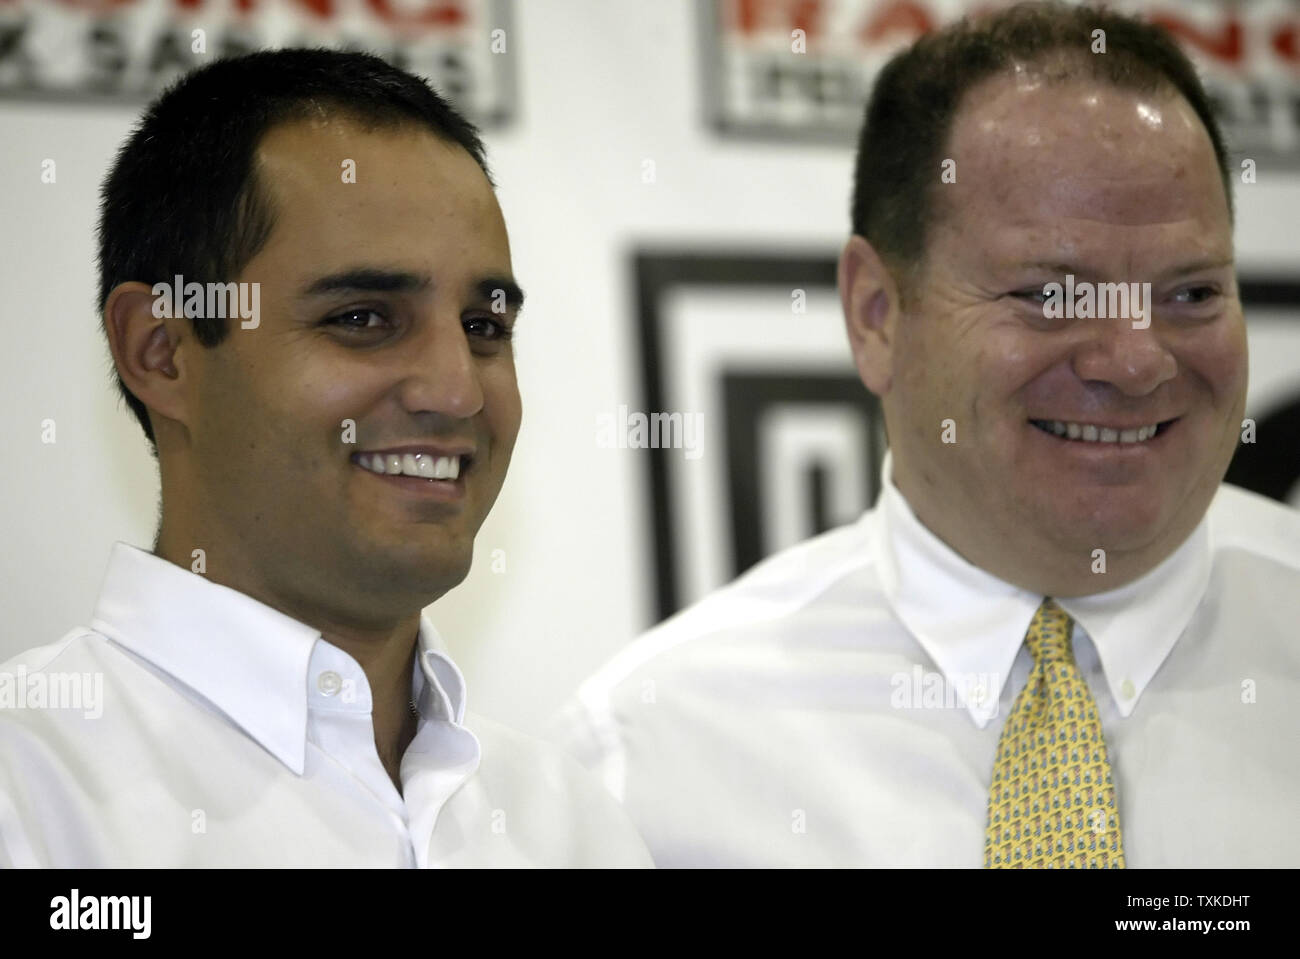 NASCAR driver Juan Pablo Montoya of Colombia, left, and team owner Chip Ganassi laugh during a press conference at Chip Ganassi Racing in Concord, NC on January 22, 2007 during the NASCAR NEXTEL Cup Media Tour. (UPI Photo/Nell Redmond) Stock Photo